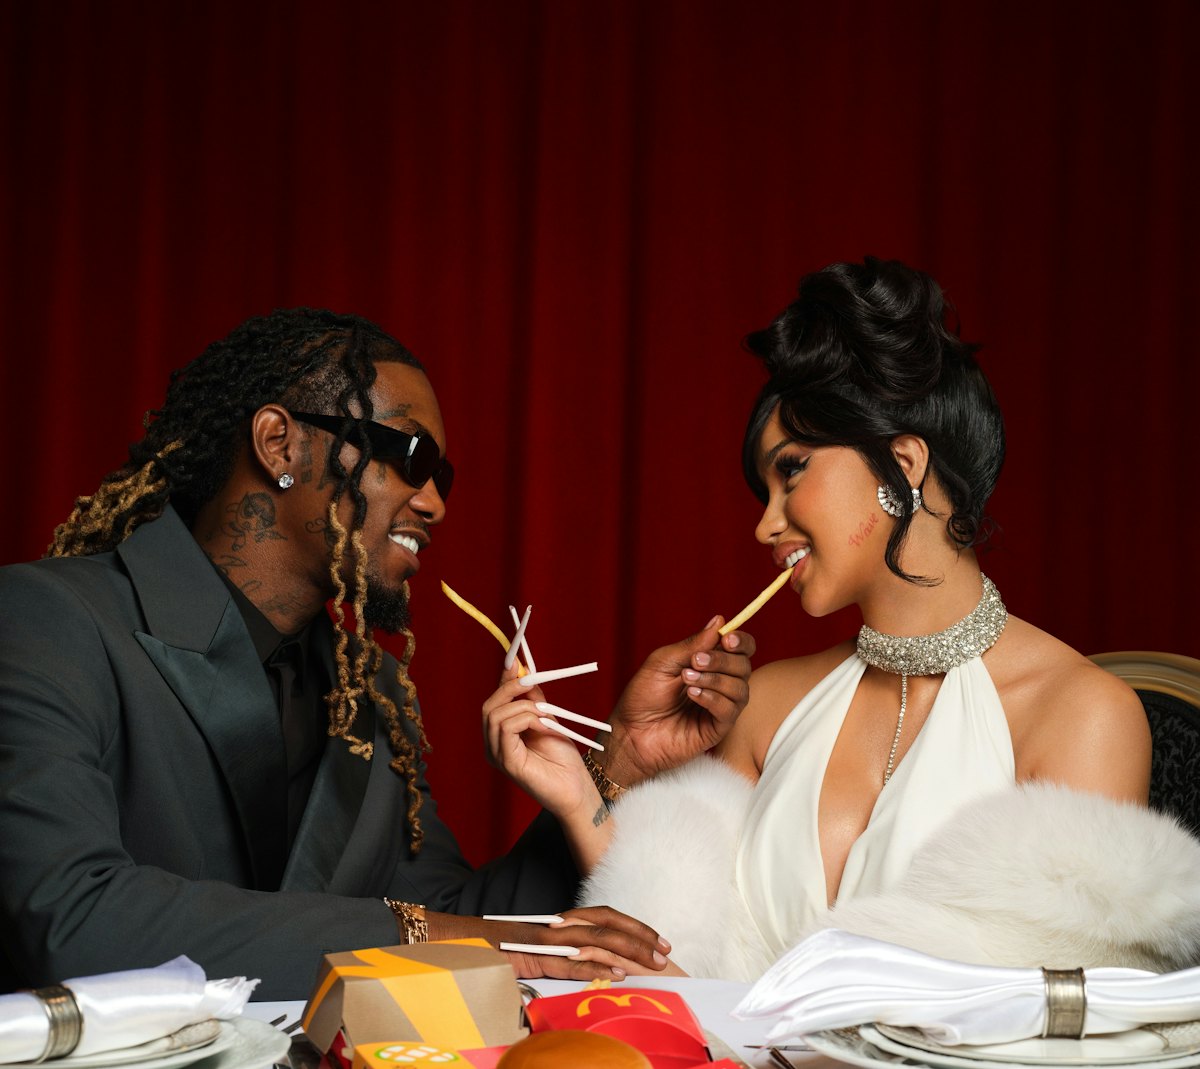 McDonald's Cardi B & Offset meal is a lowkey Valentine's Day treat.